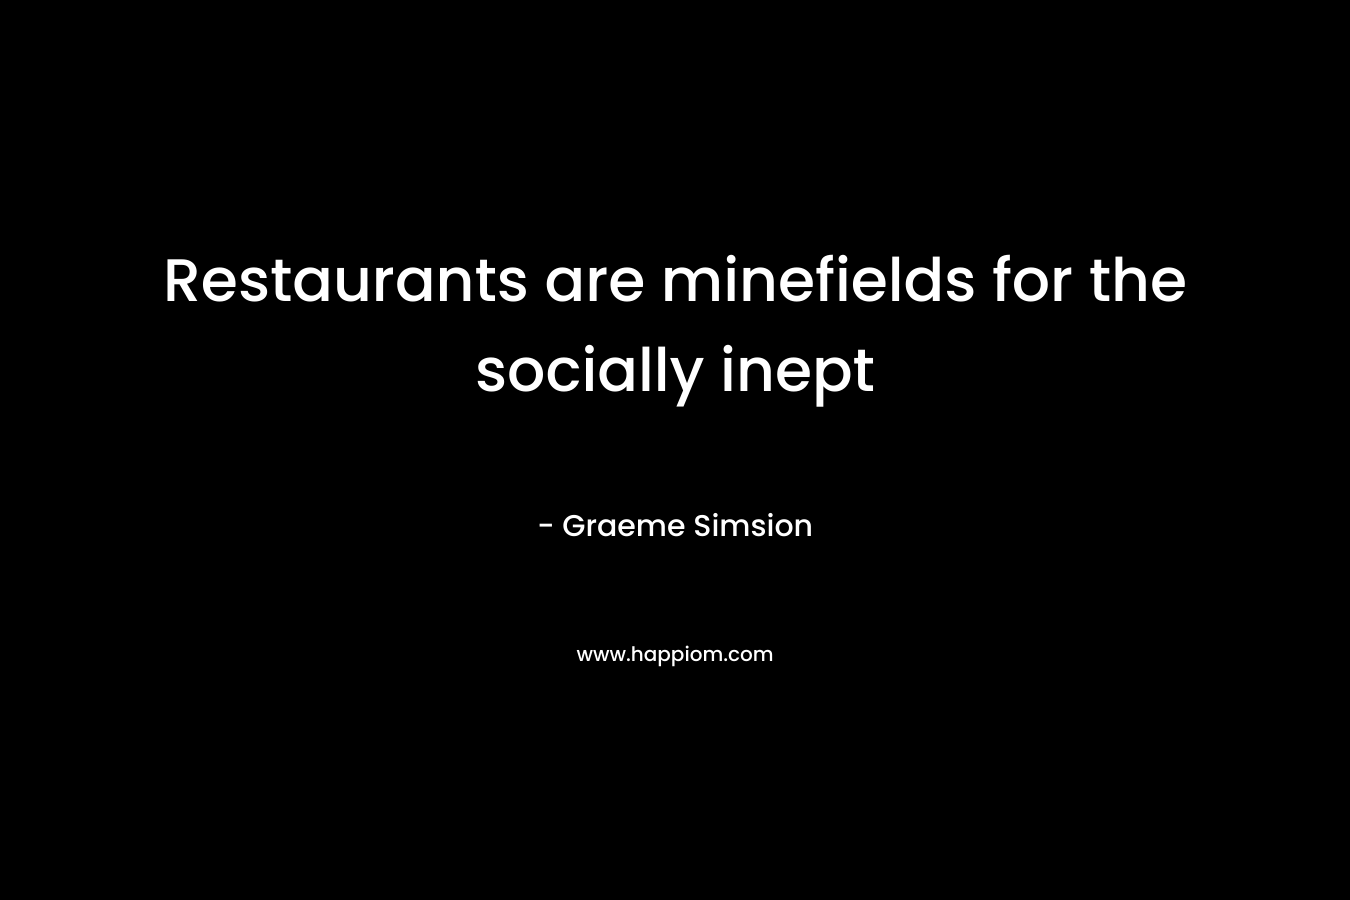 Restaurants are minefields for the socially inept